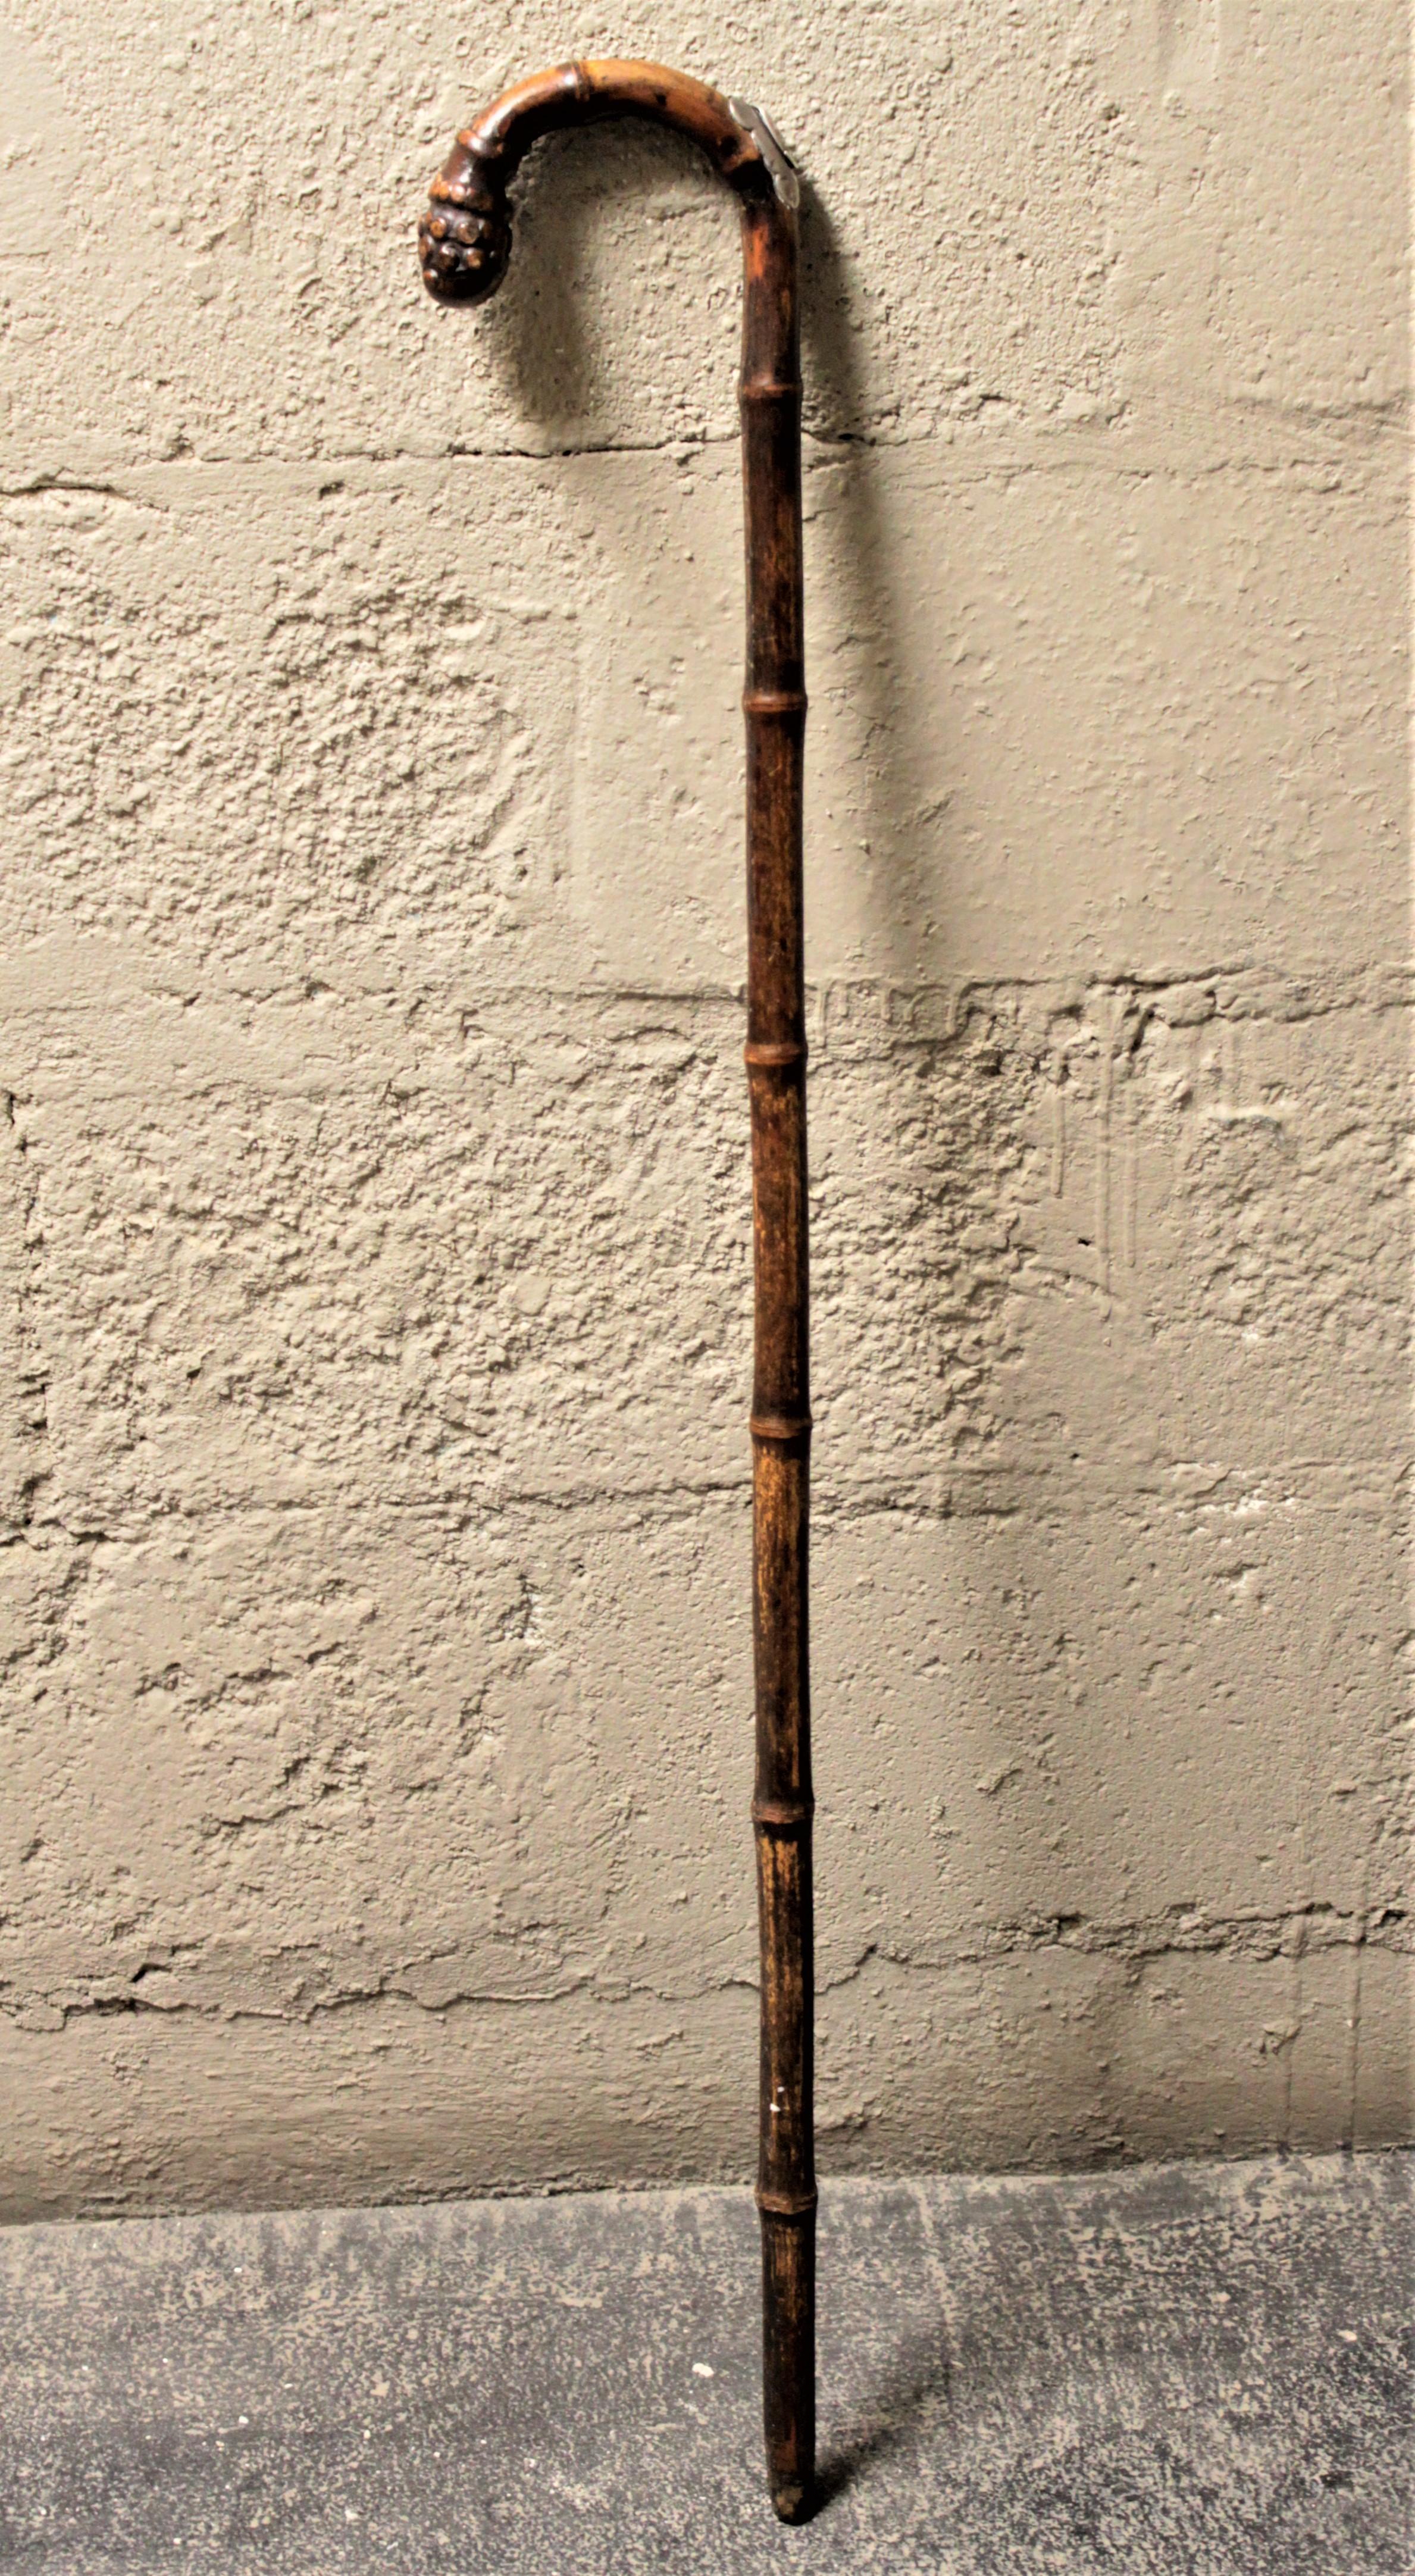 This antique horse dealer's cane was made in England by most likely Joseph Hicks and dates to the 1890s and done in the period, high Victorian style. The cane handle is a carved root ball, and inserted within the body of the cane is a well-crafted